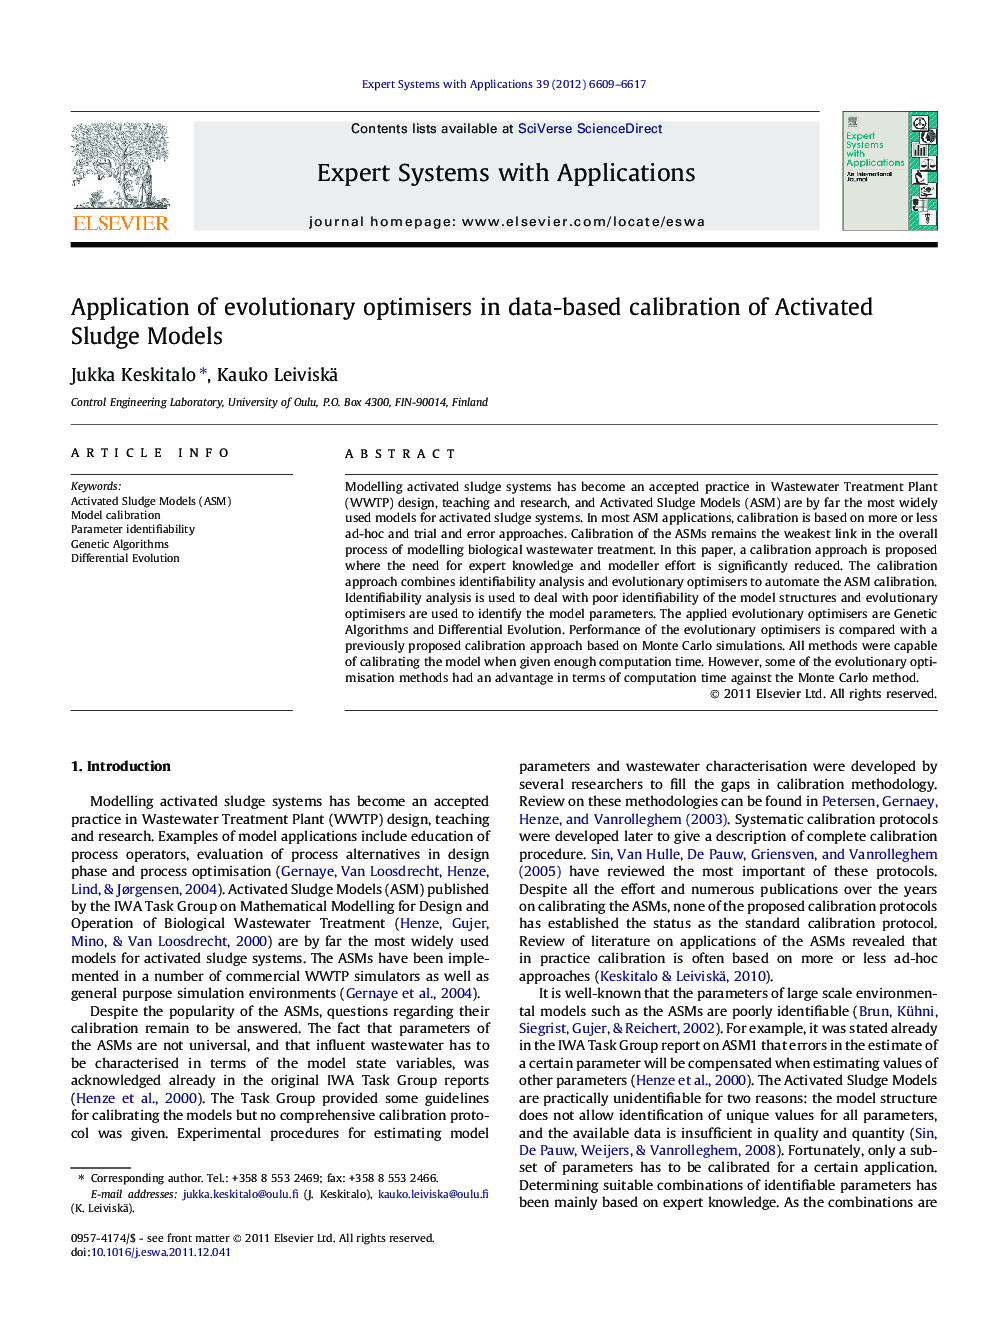 Application of evolutionary optimisers in data-based calibration of Activated Sludge Models